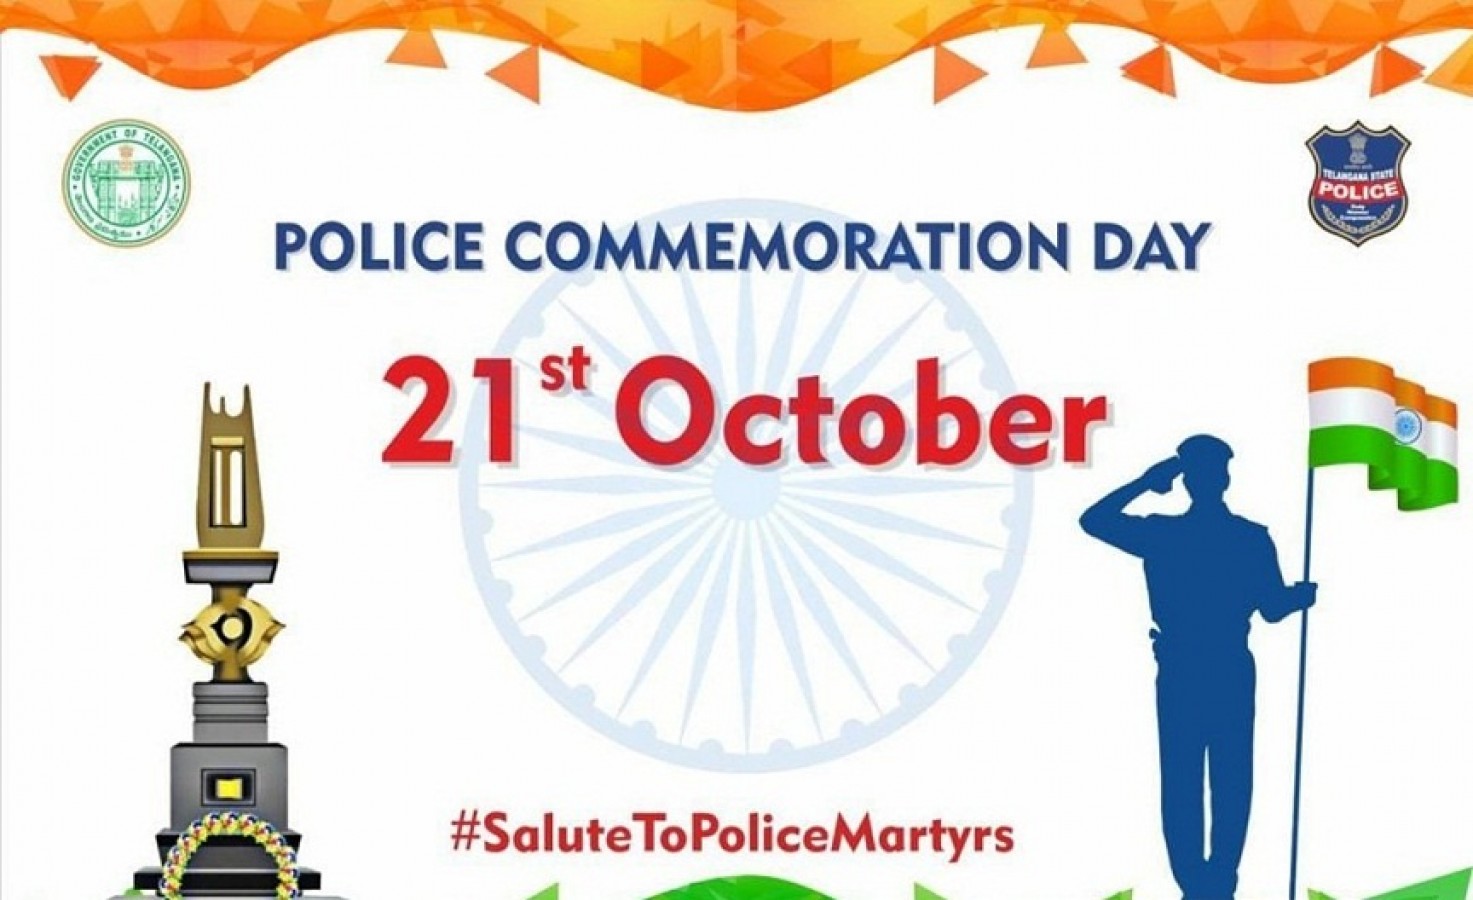 Police commemoration day observed with due honour